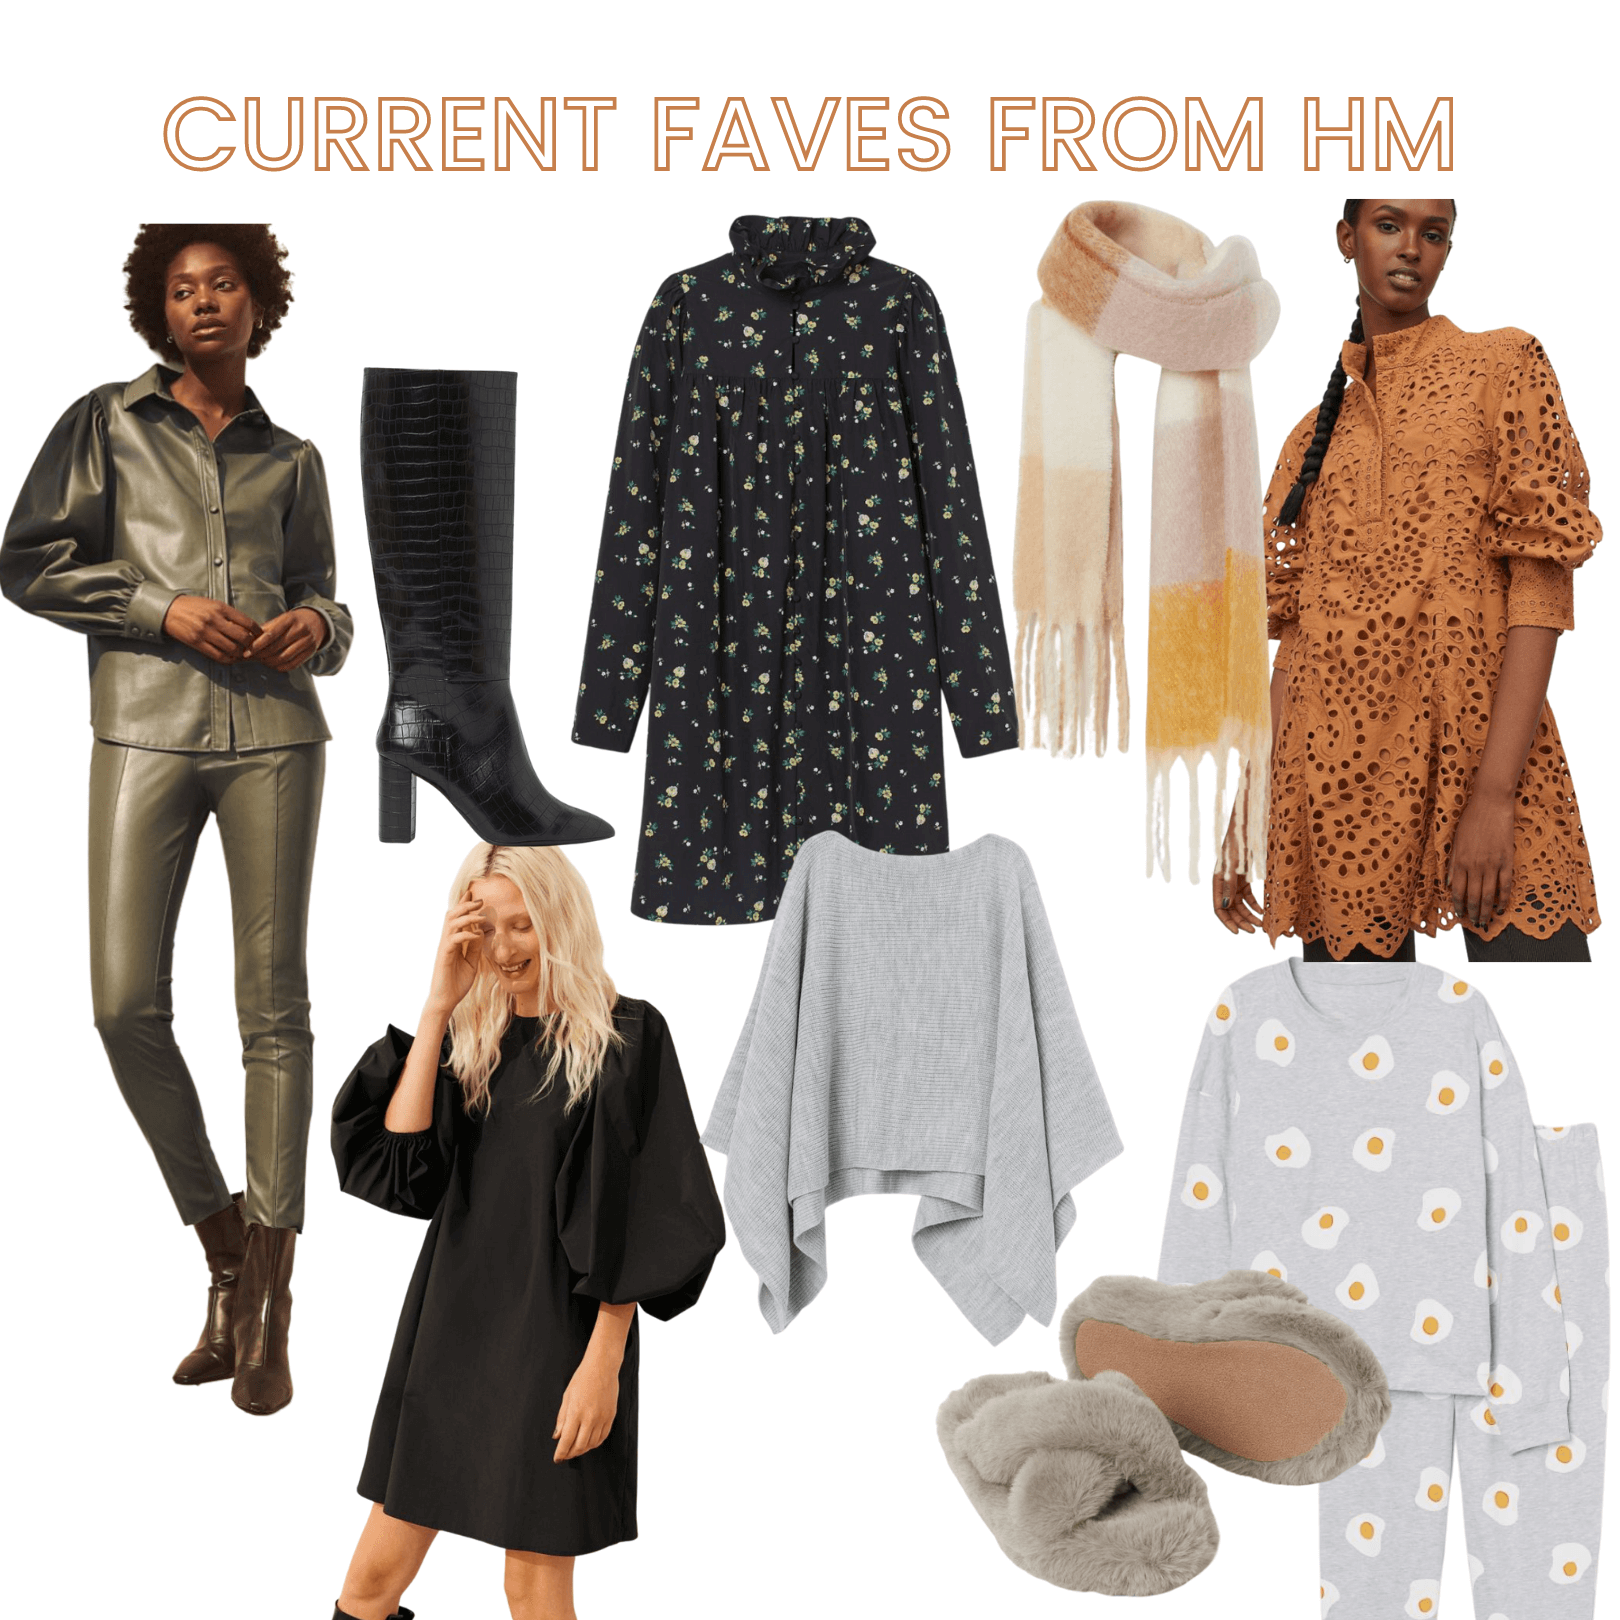 Current Faves From H&M